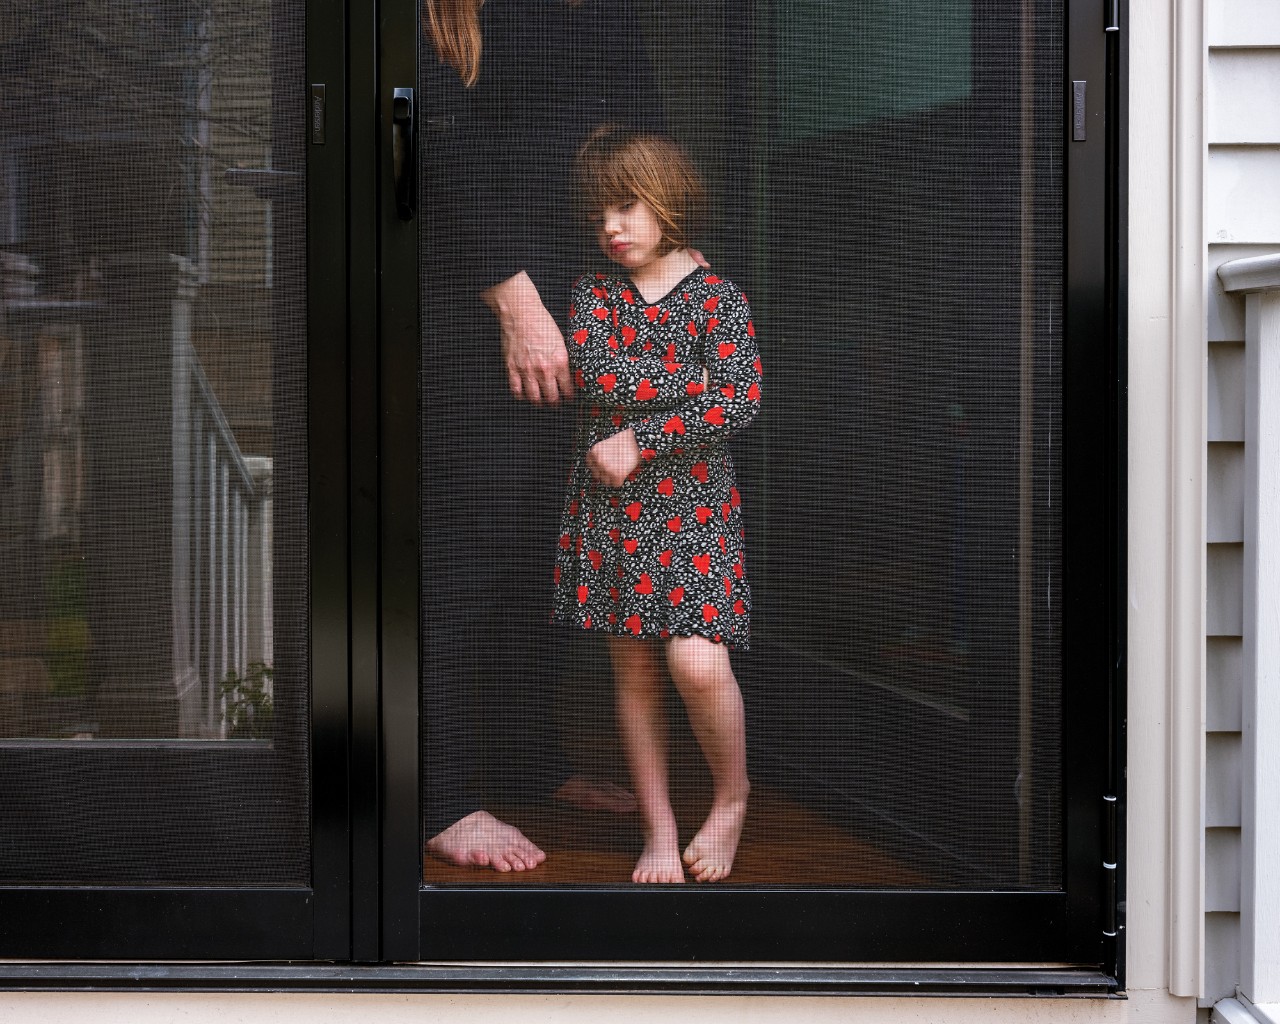 Figure 6. “Ellie and Megan, Cambridge, Massachusetts, 2020.” Ellie, a small child clothed in a floral dress, stands in front of her partially shown mother, Megan, as both look out their front door window. 